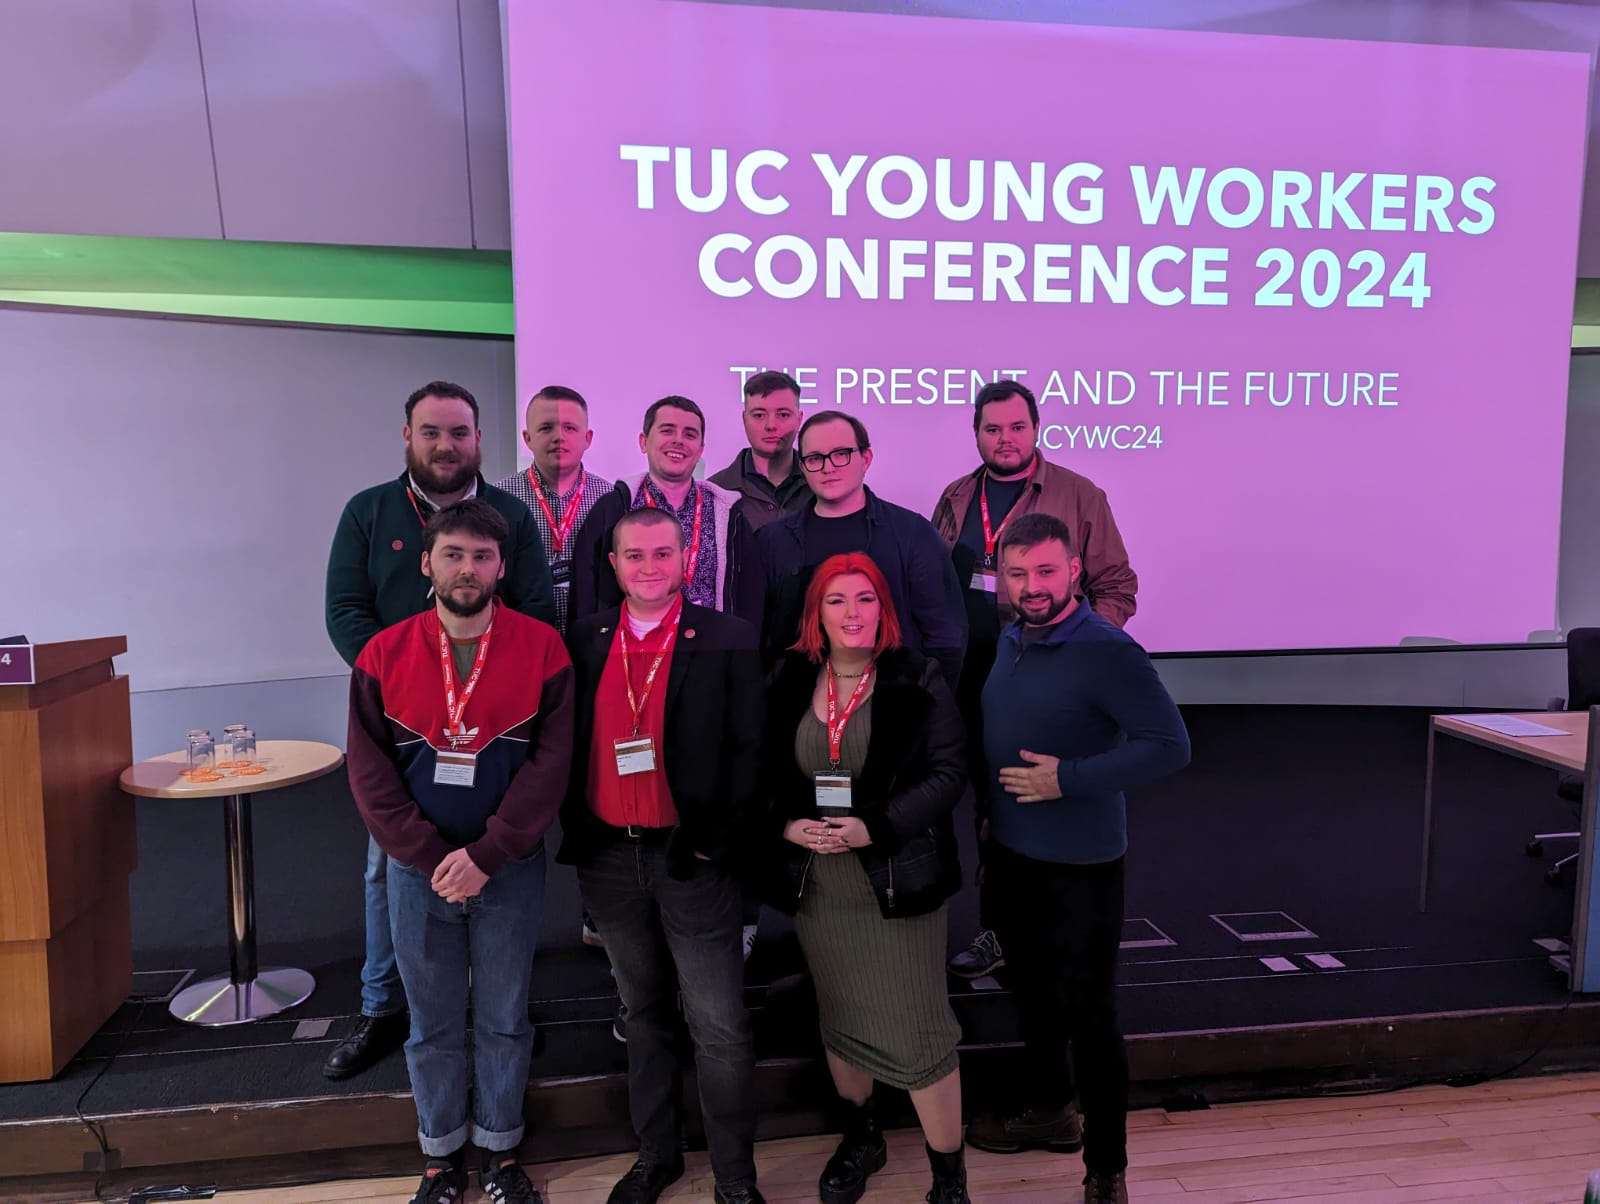 10 young delegates from different rail unions at the TUC Young Workers conference